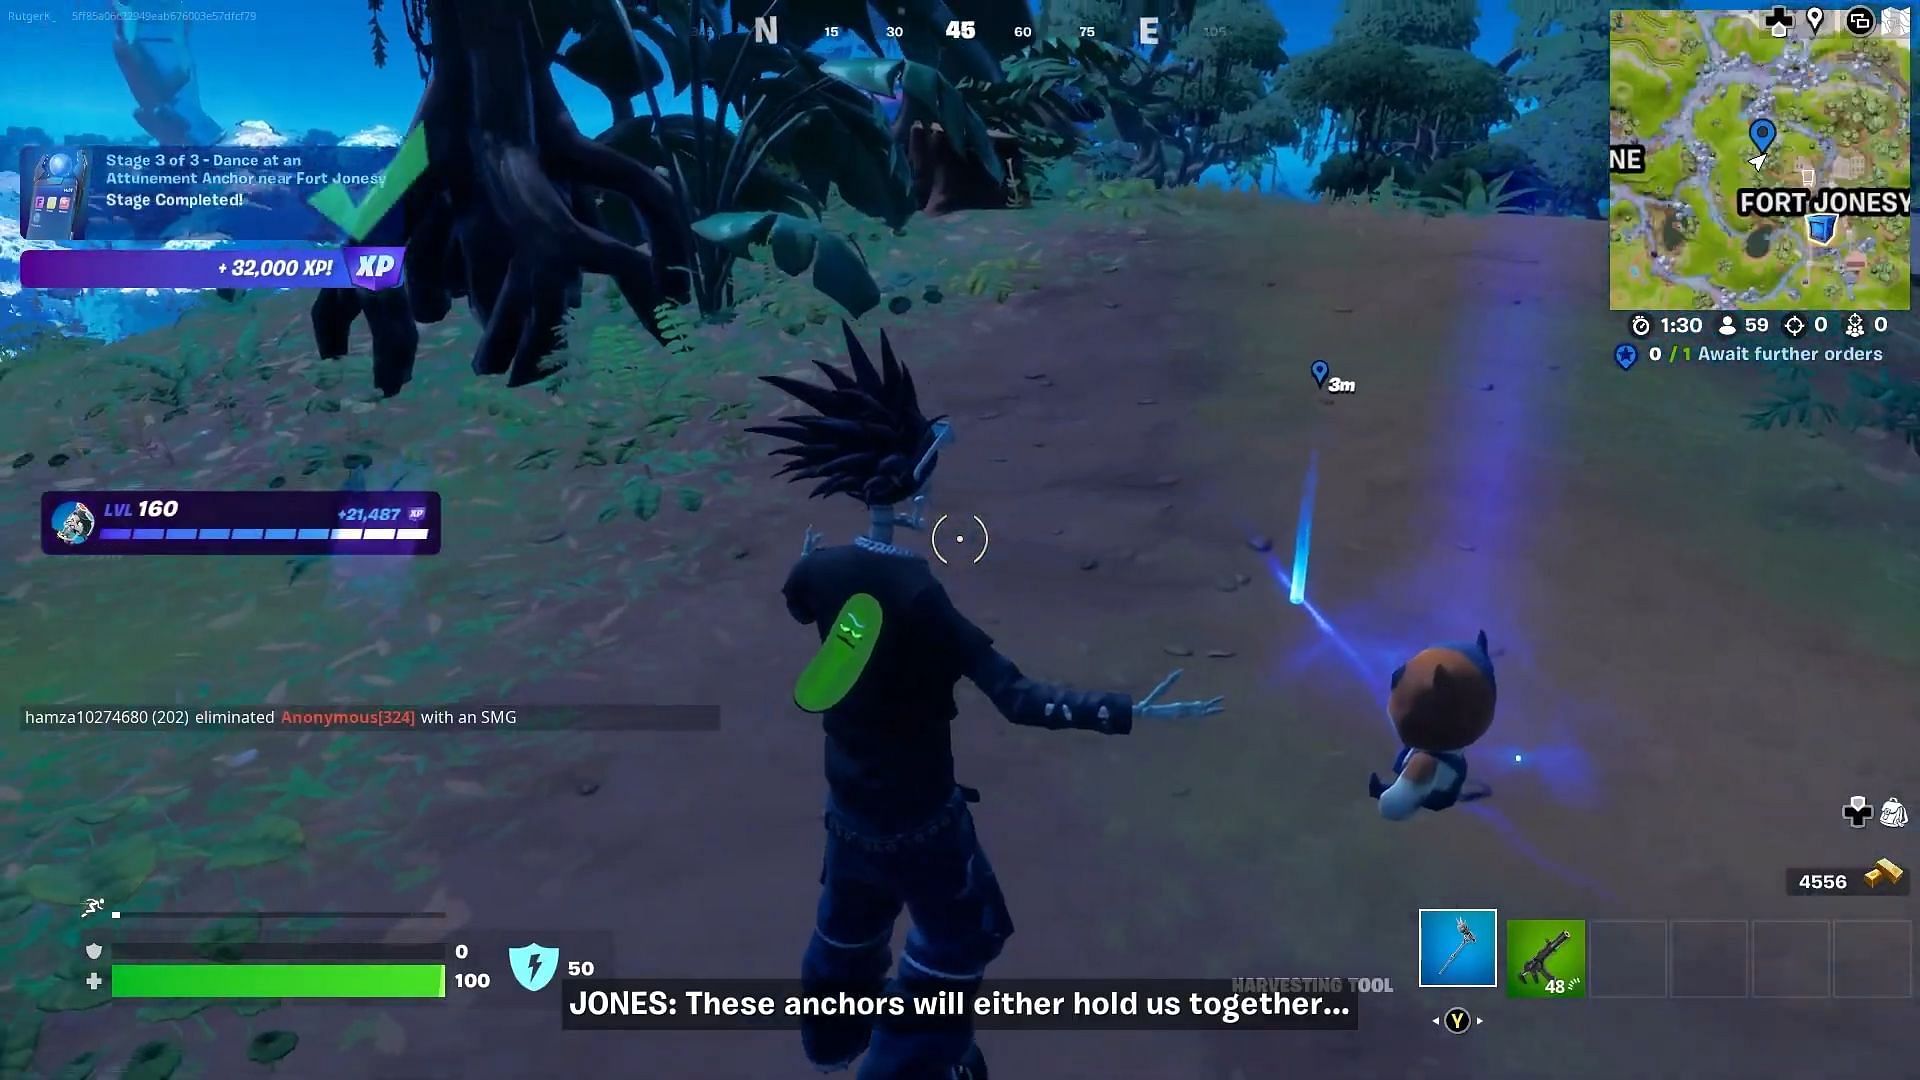 You will have to find Attunement Anchors and dance near them for the next quest (Image via Epic Games)